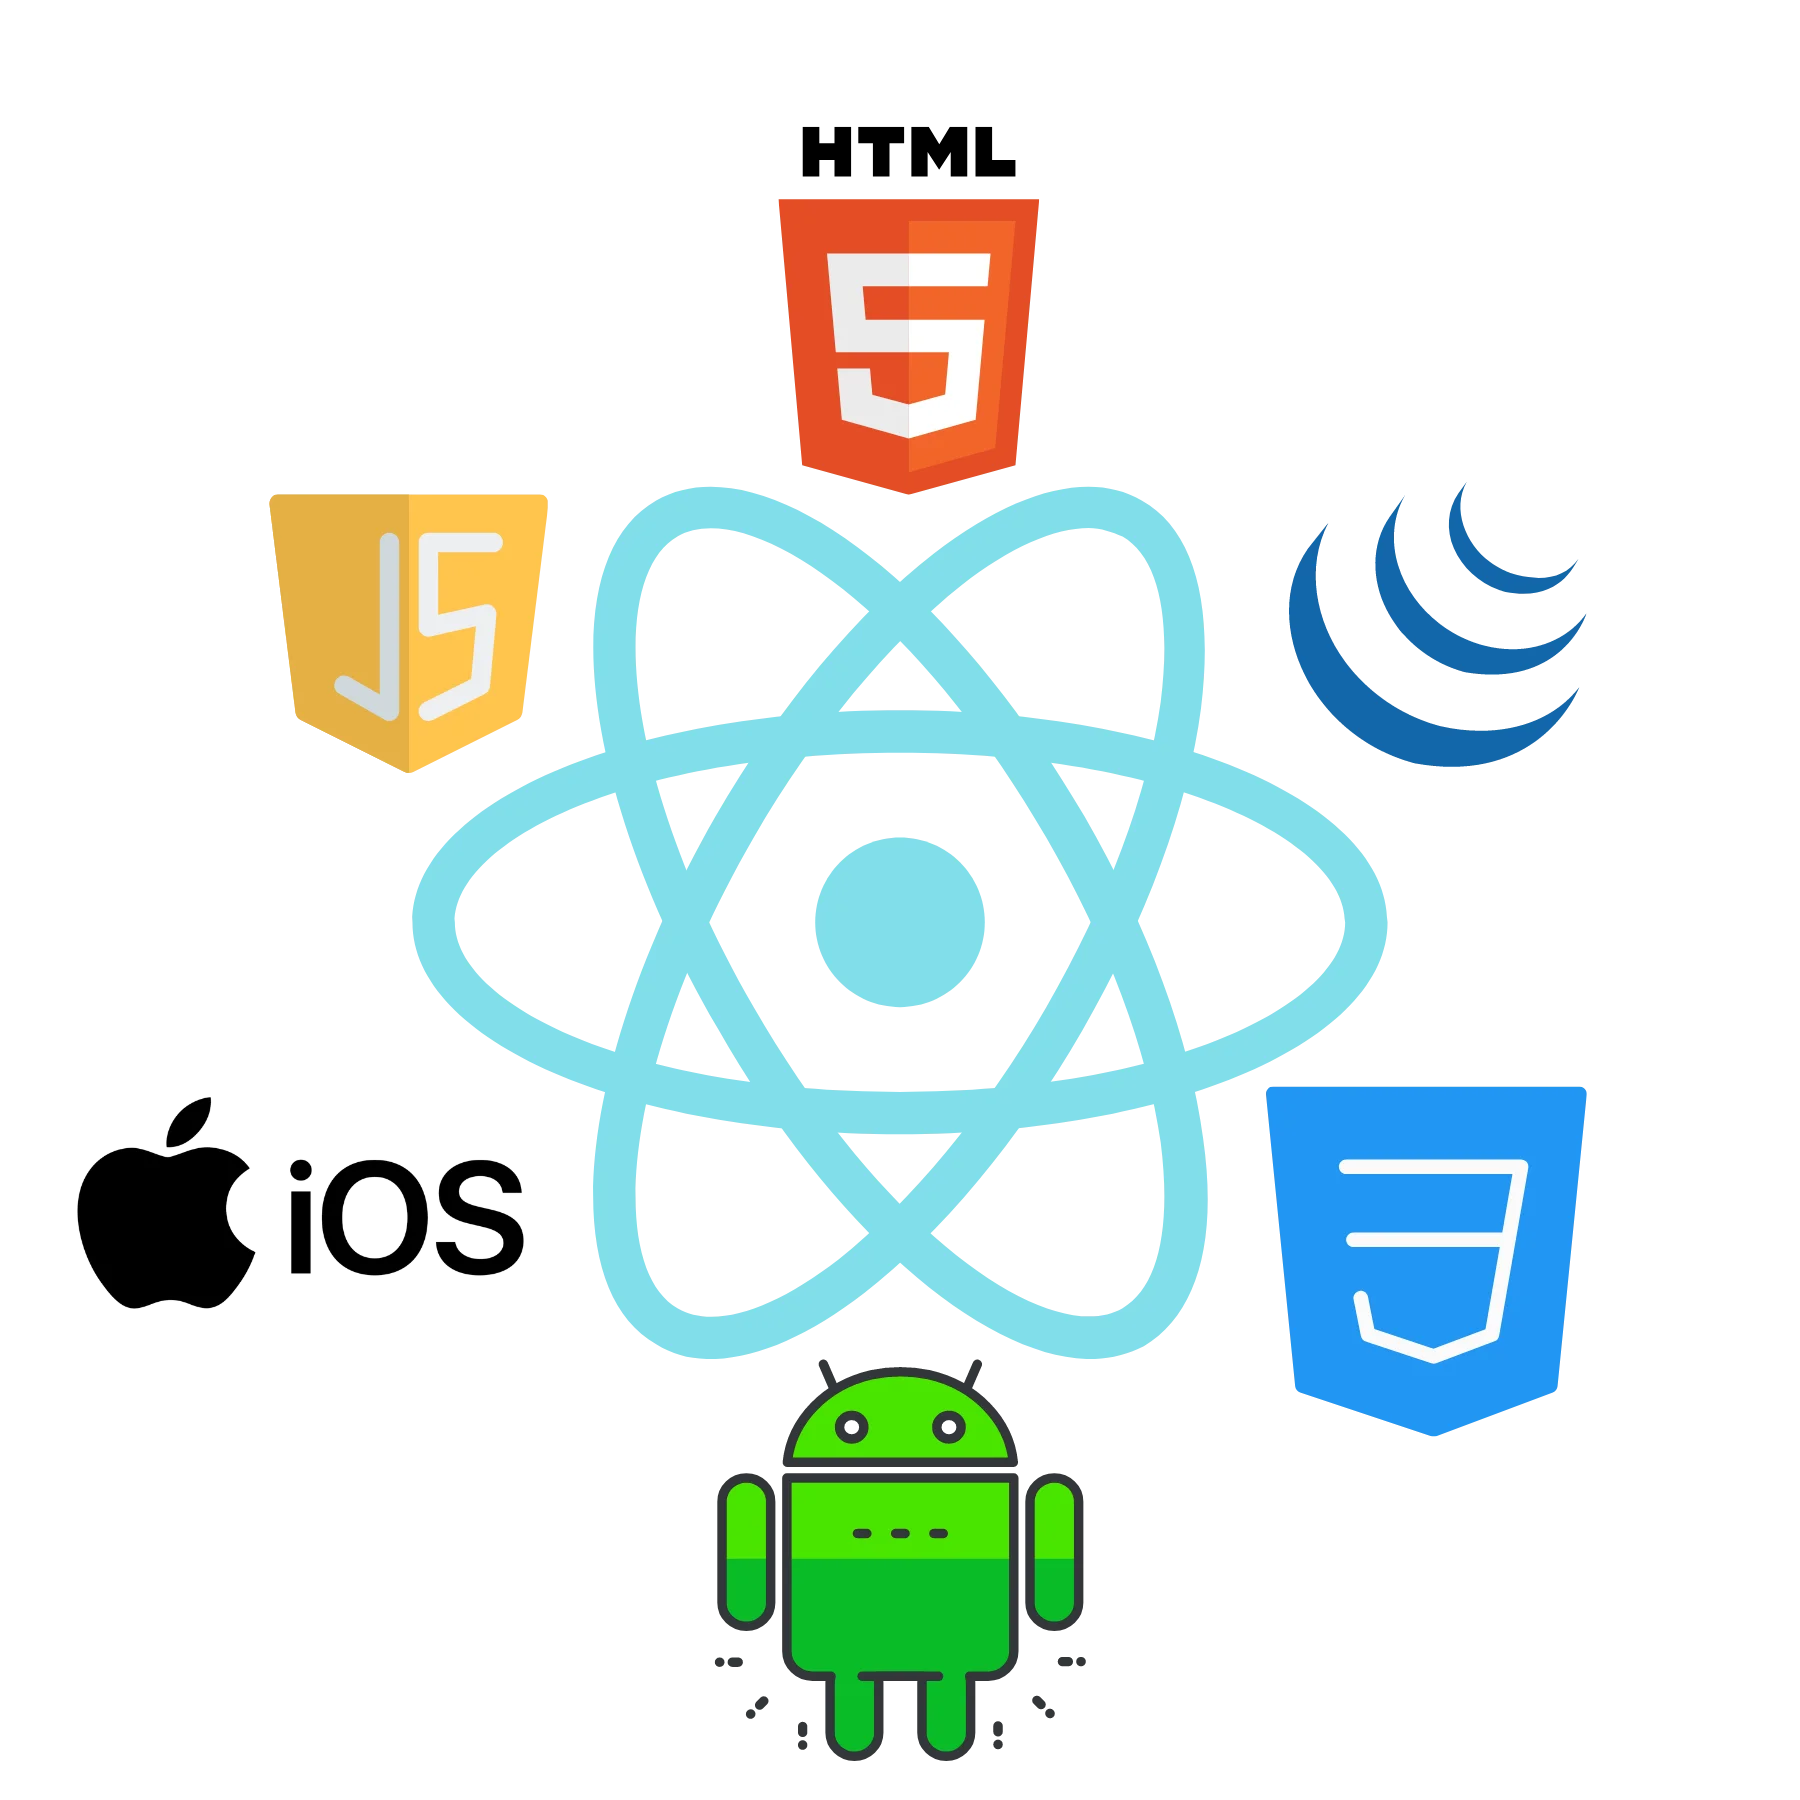 We specialize in crafting high-performance mobile applications using React Native, delivering cross-platform solutions with exceptional user experiences and seamless integration.